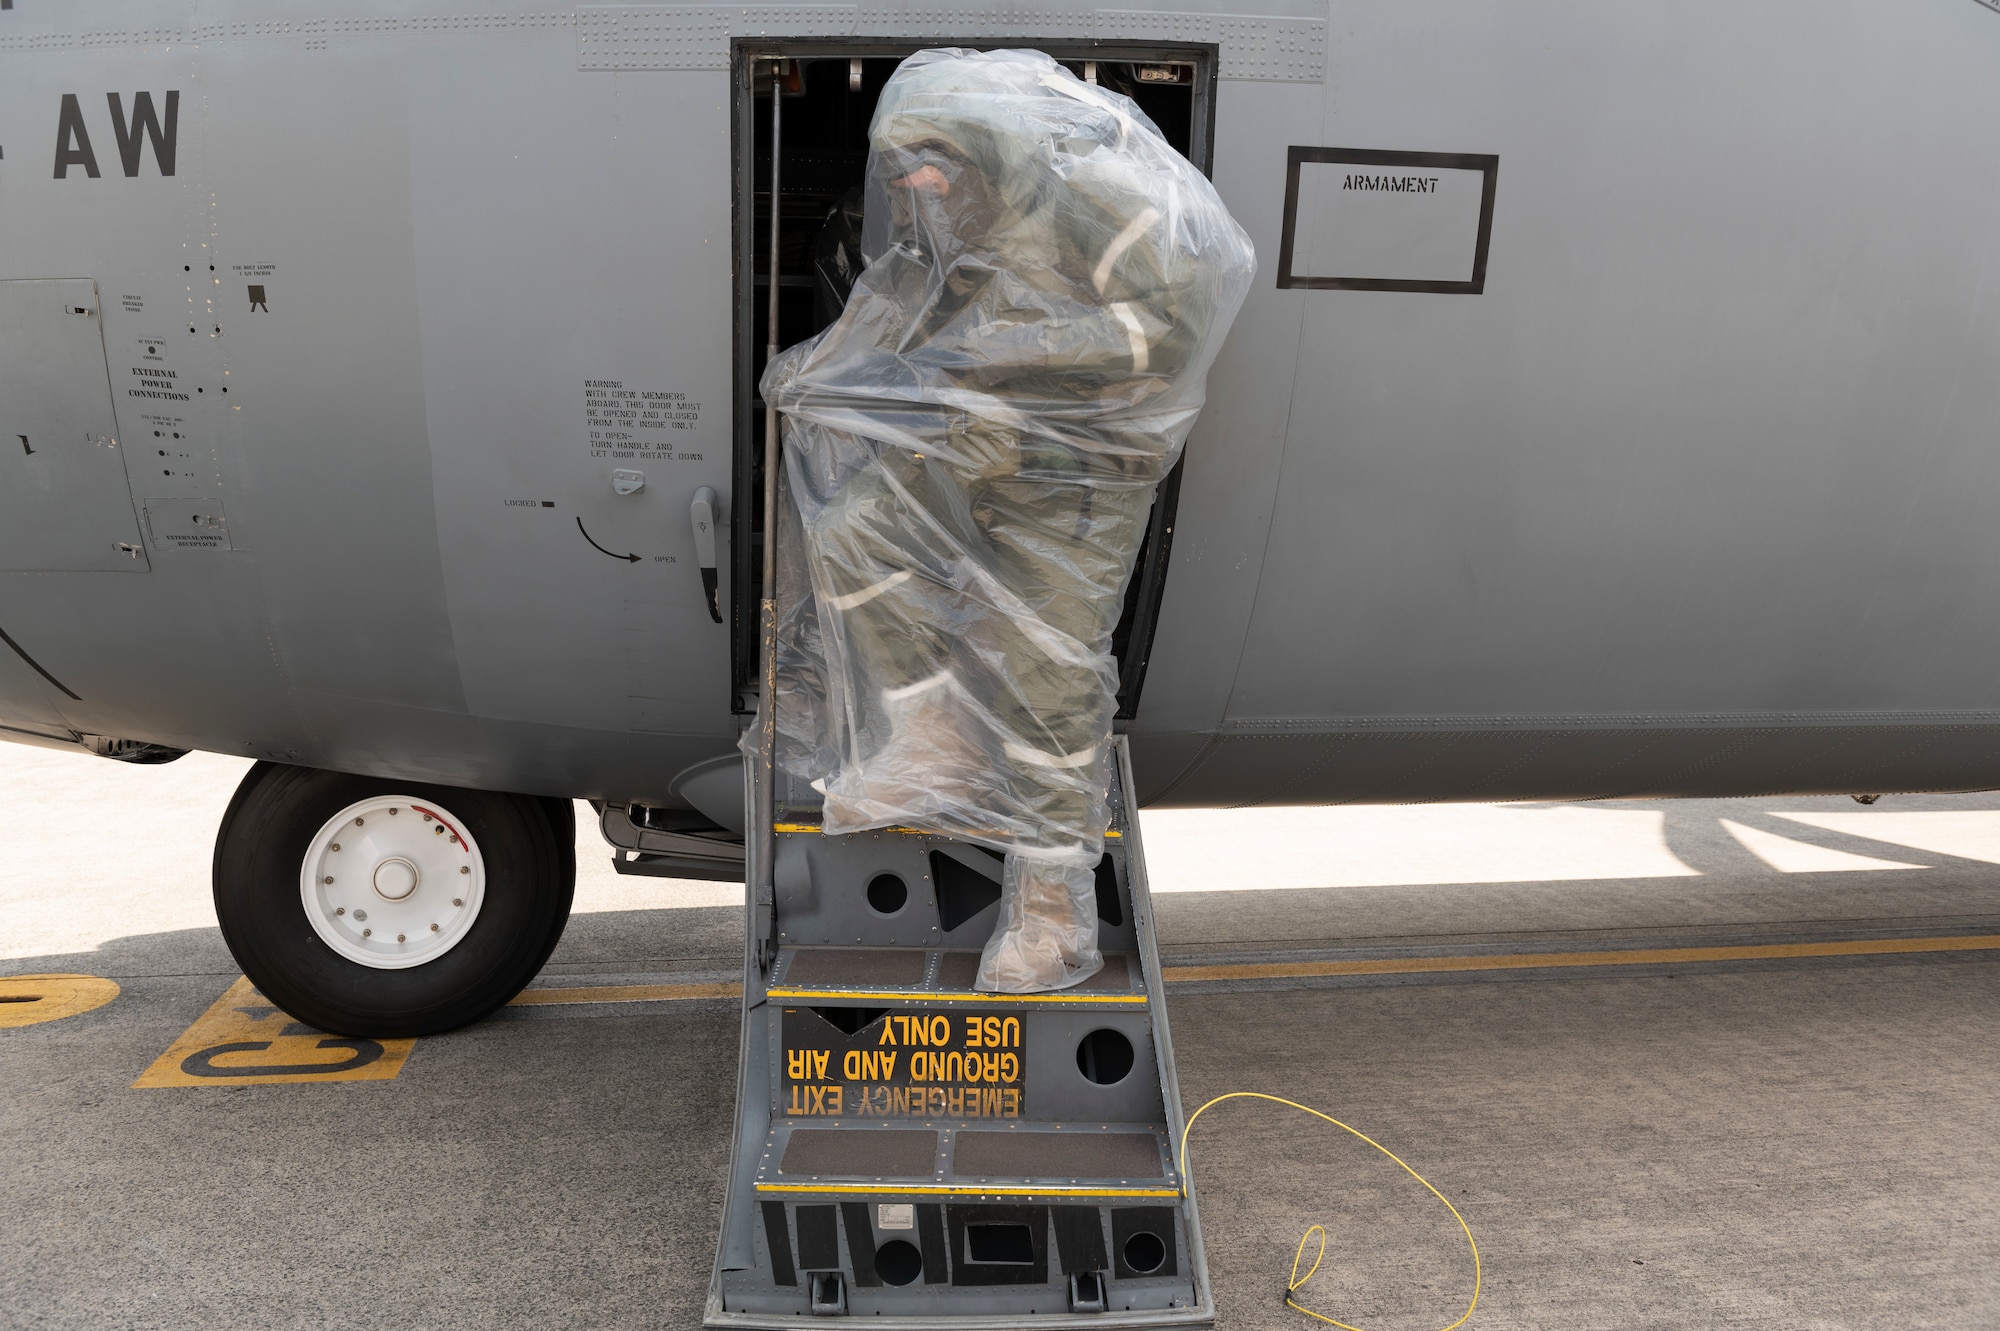 A pilot wearing protective gear and covered in a plastic bag steps out of a plane